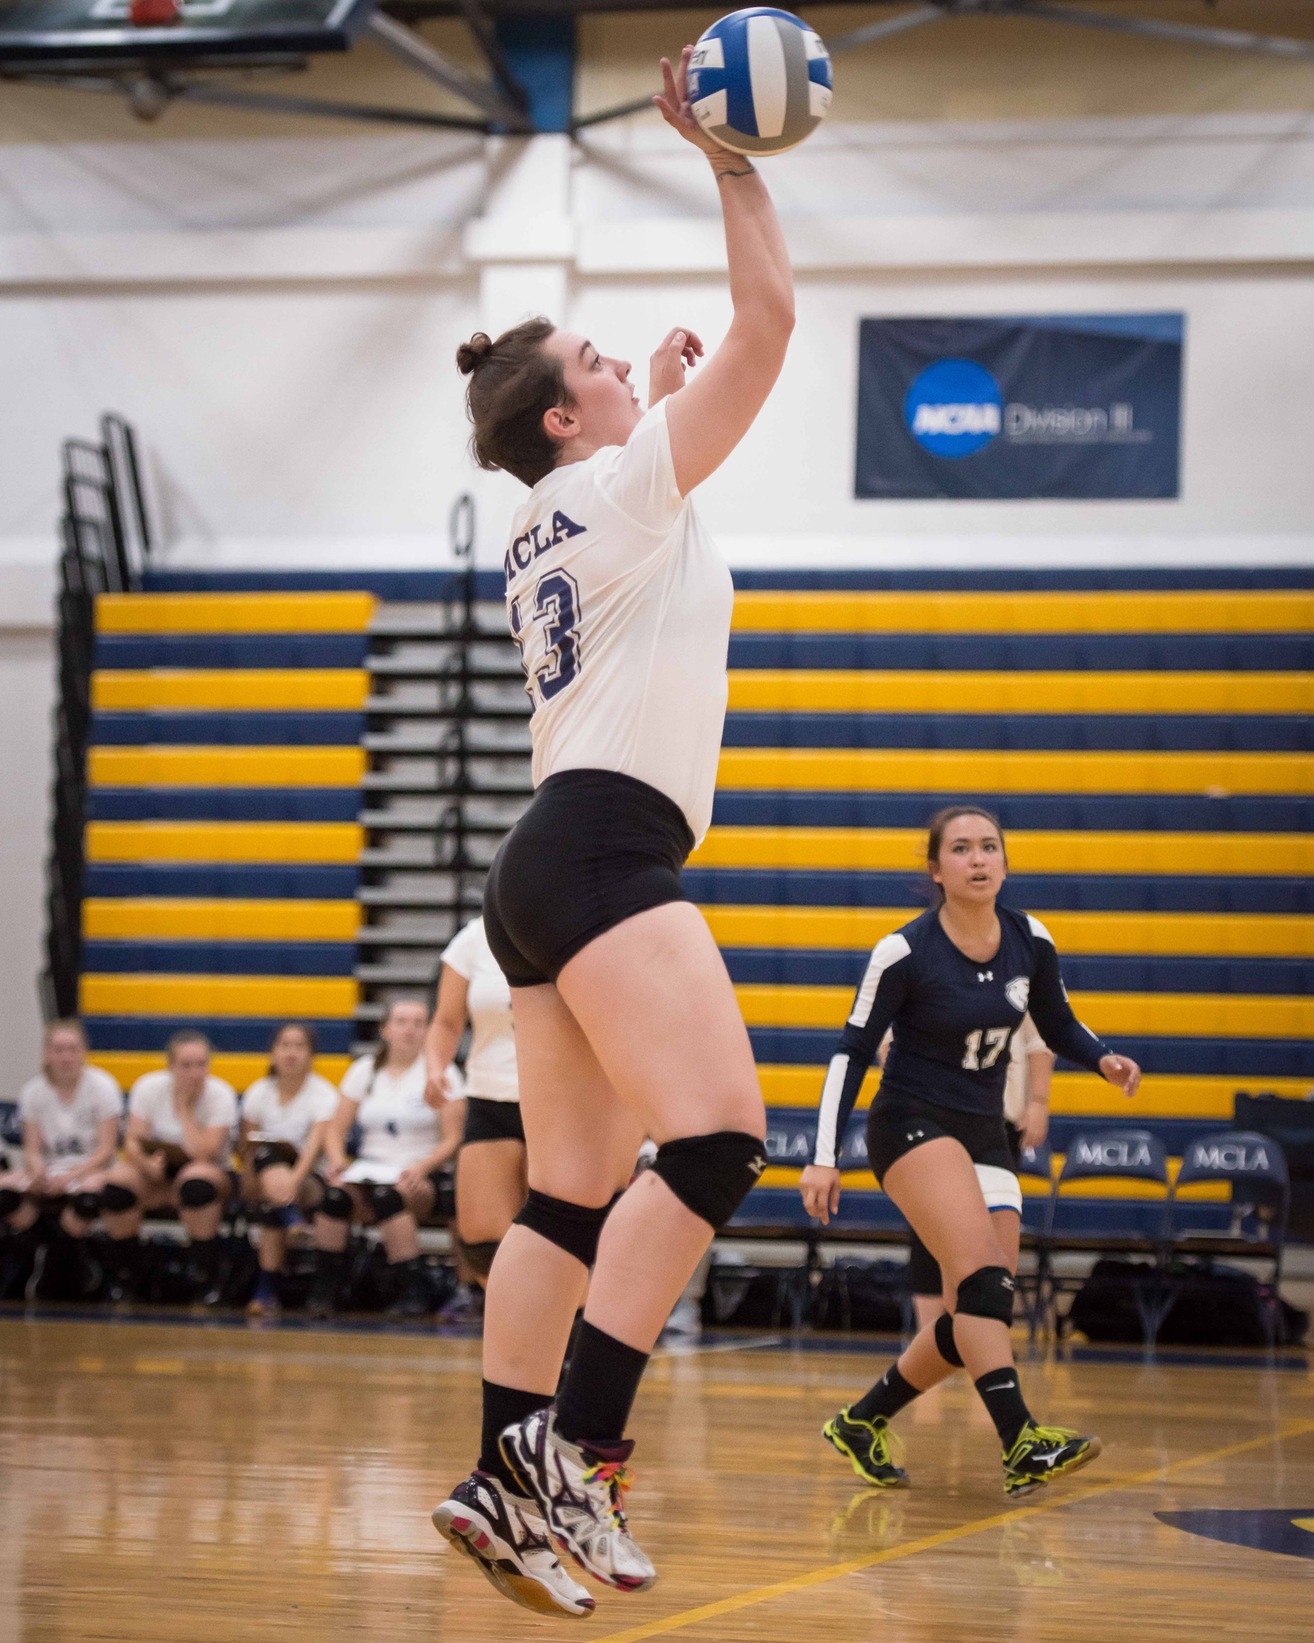 Volleyball falls to Bridgewater State 3-1 in MASCAC Quarterfinals